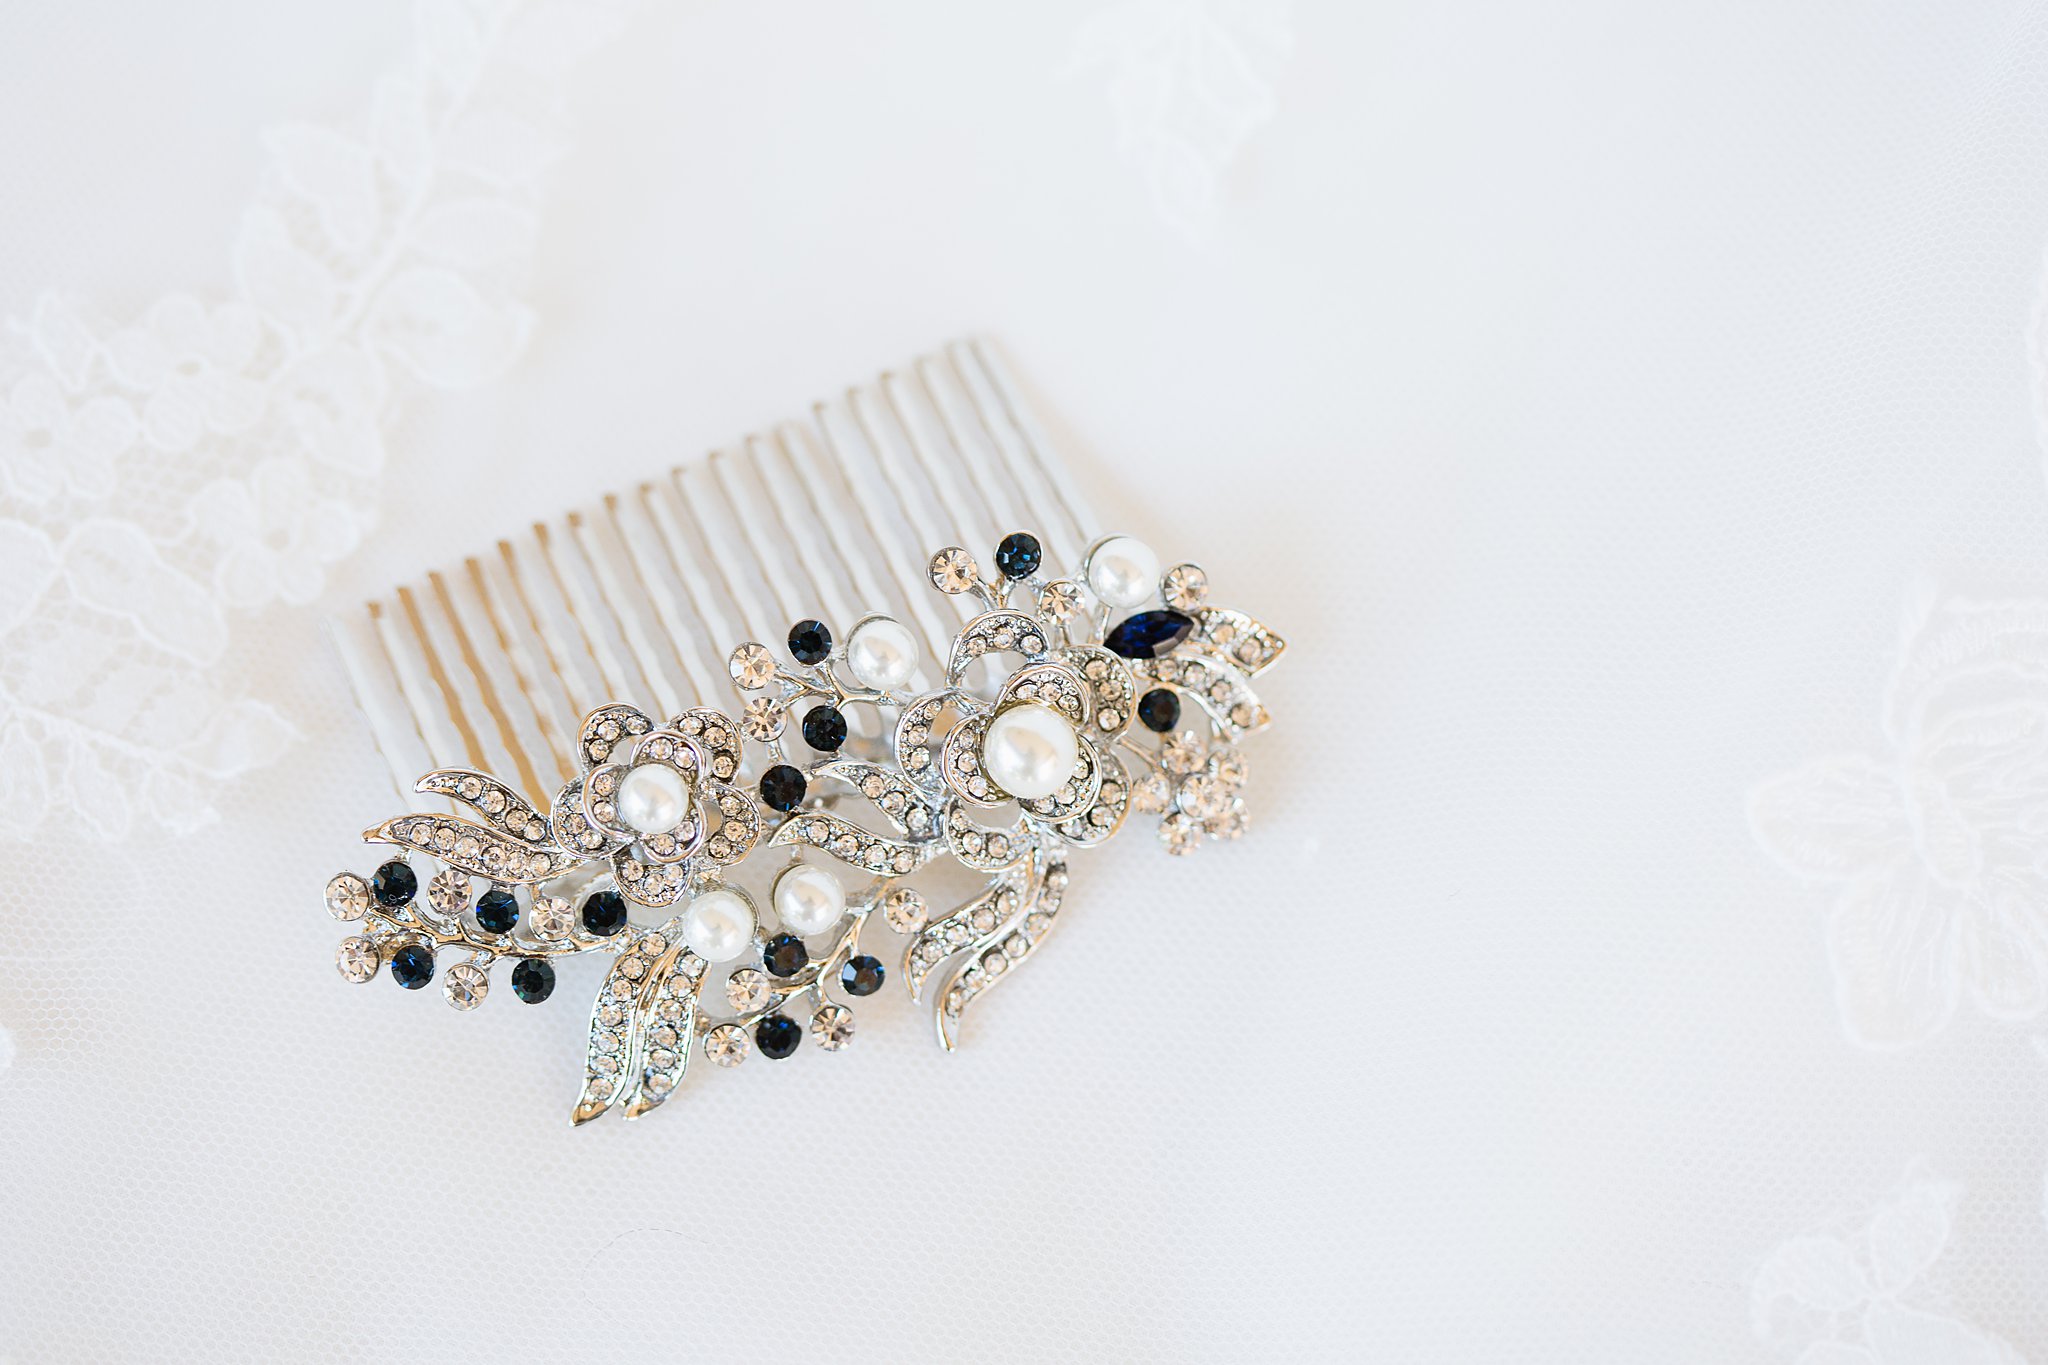 Brides's wedding day details of a something blue hairpiece by PMA Photography.